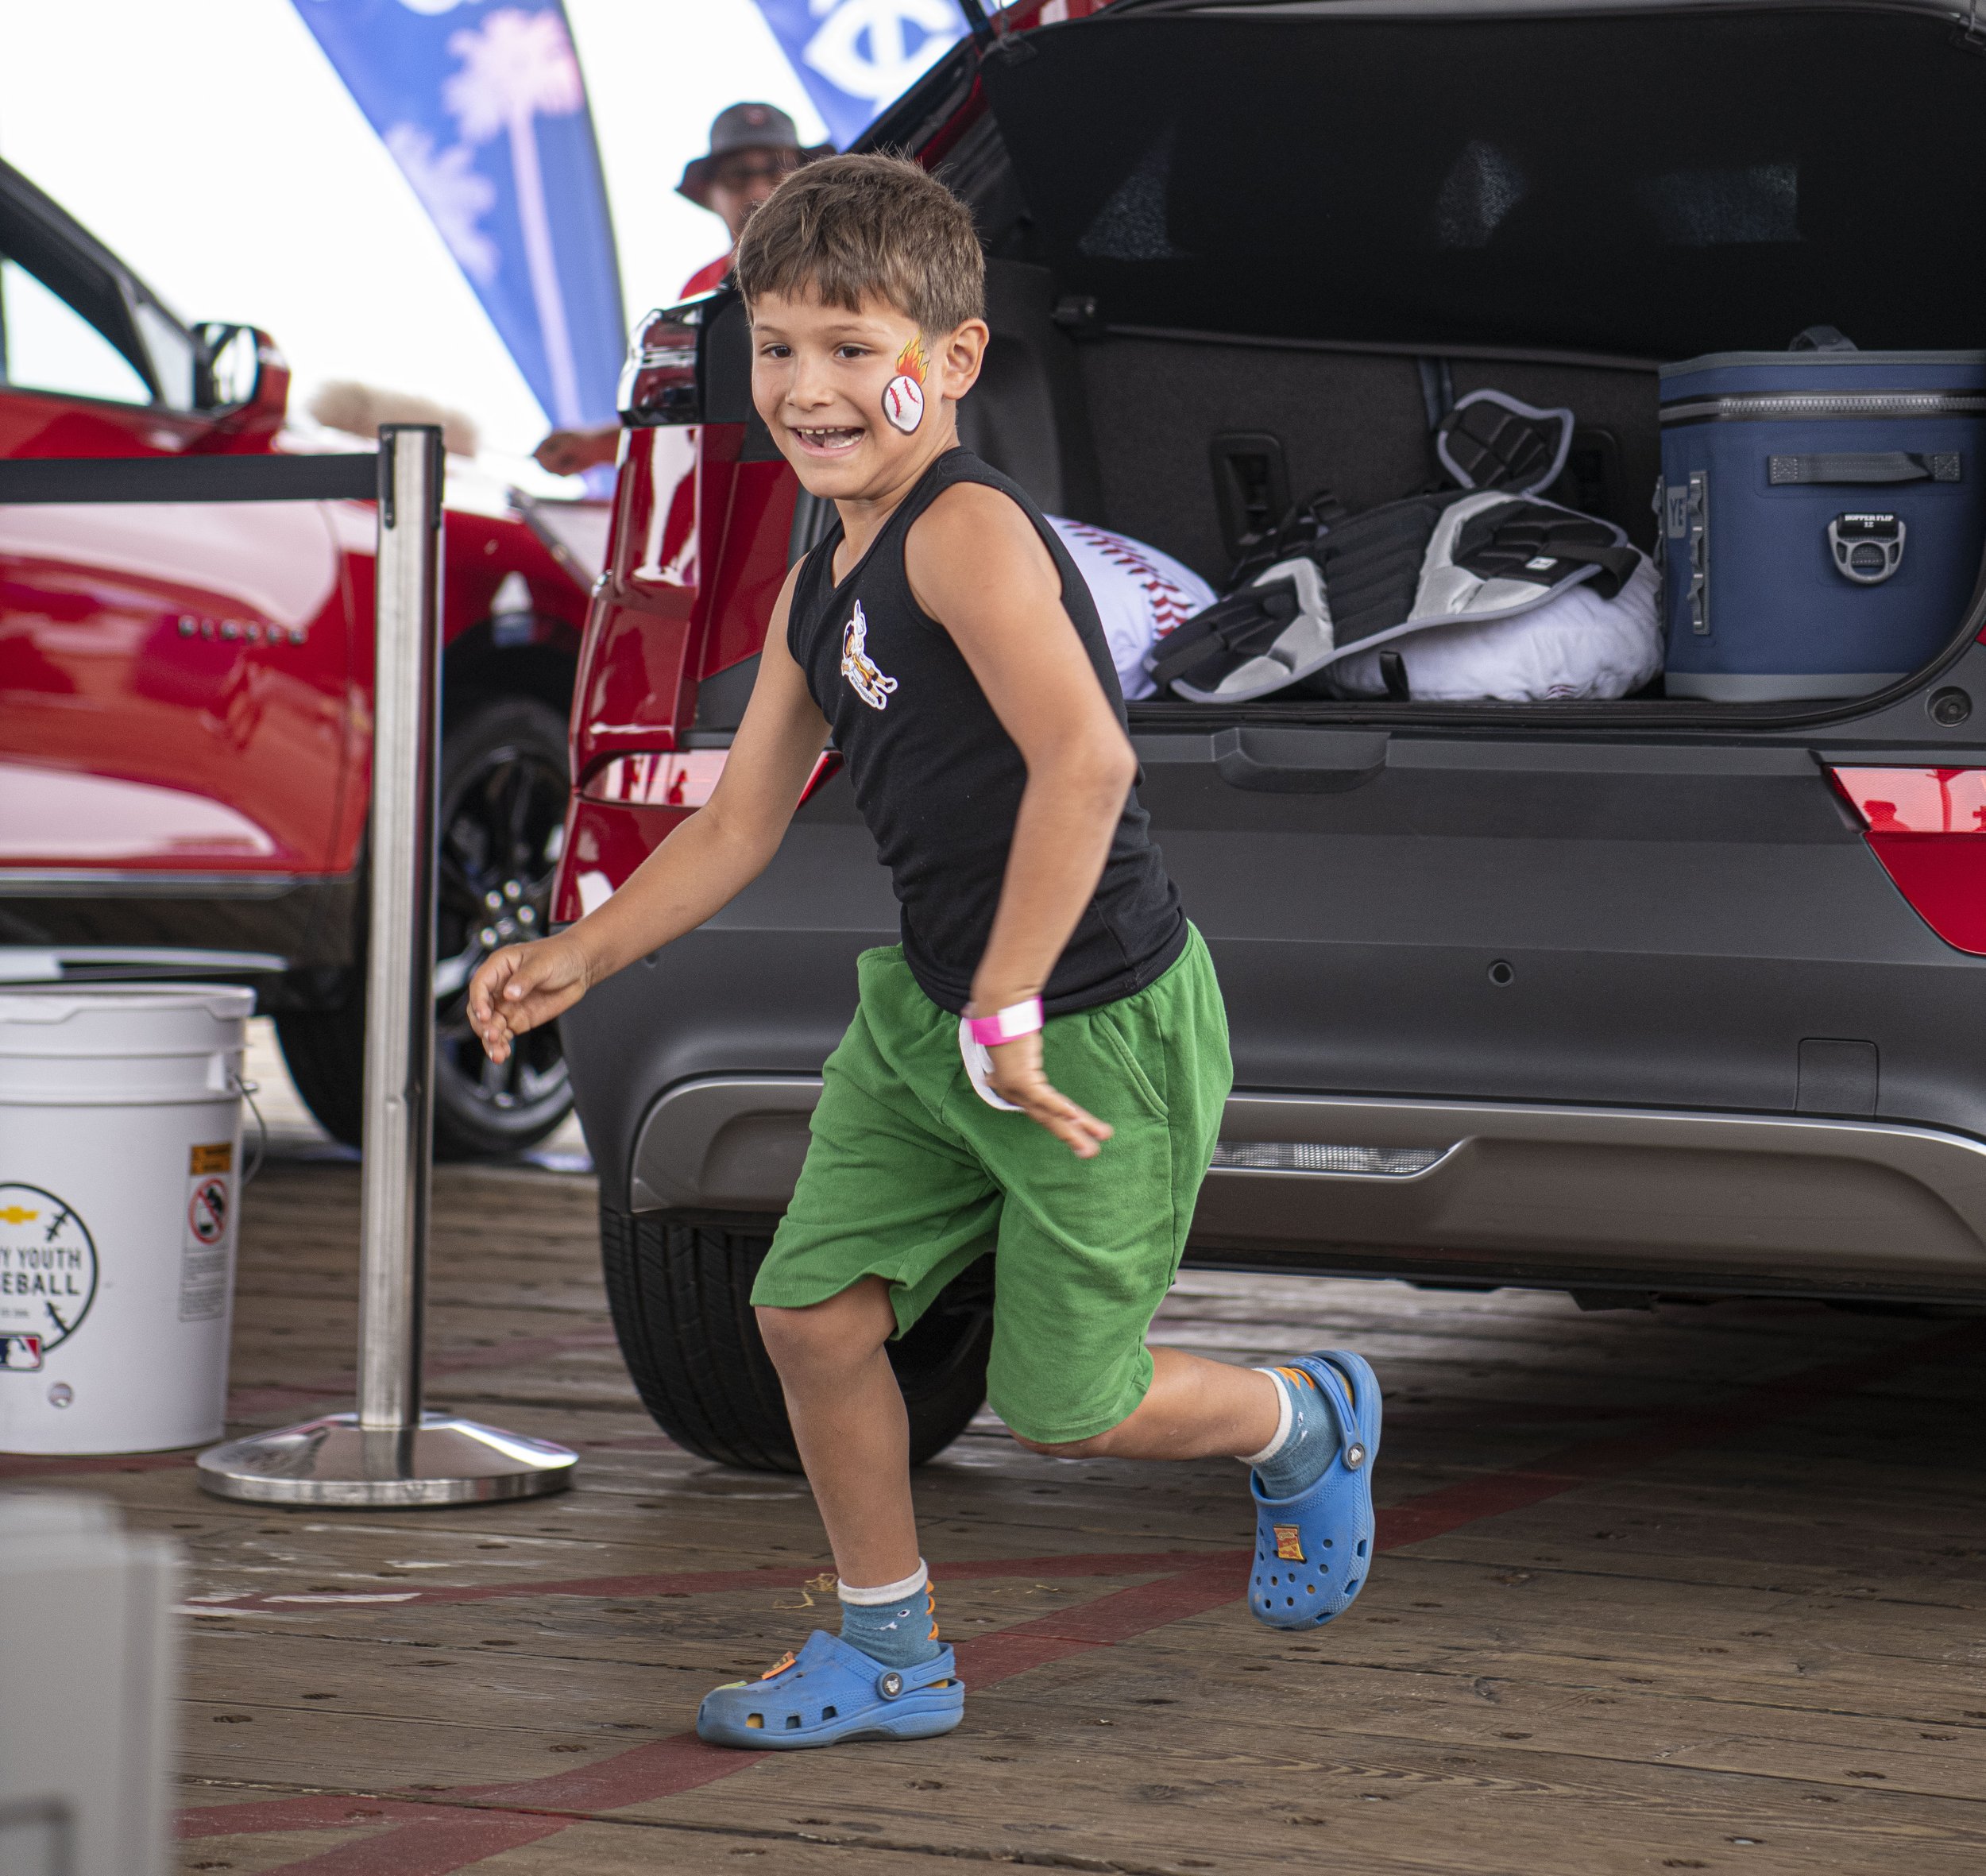  Alex (9) runs to retrieve another item to put into the vehicle during one of the events at the MLB All Star weekend festivities at the Santa Monica Pier. (Jon Putman | The Corsair) 